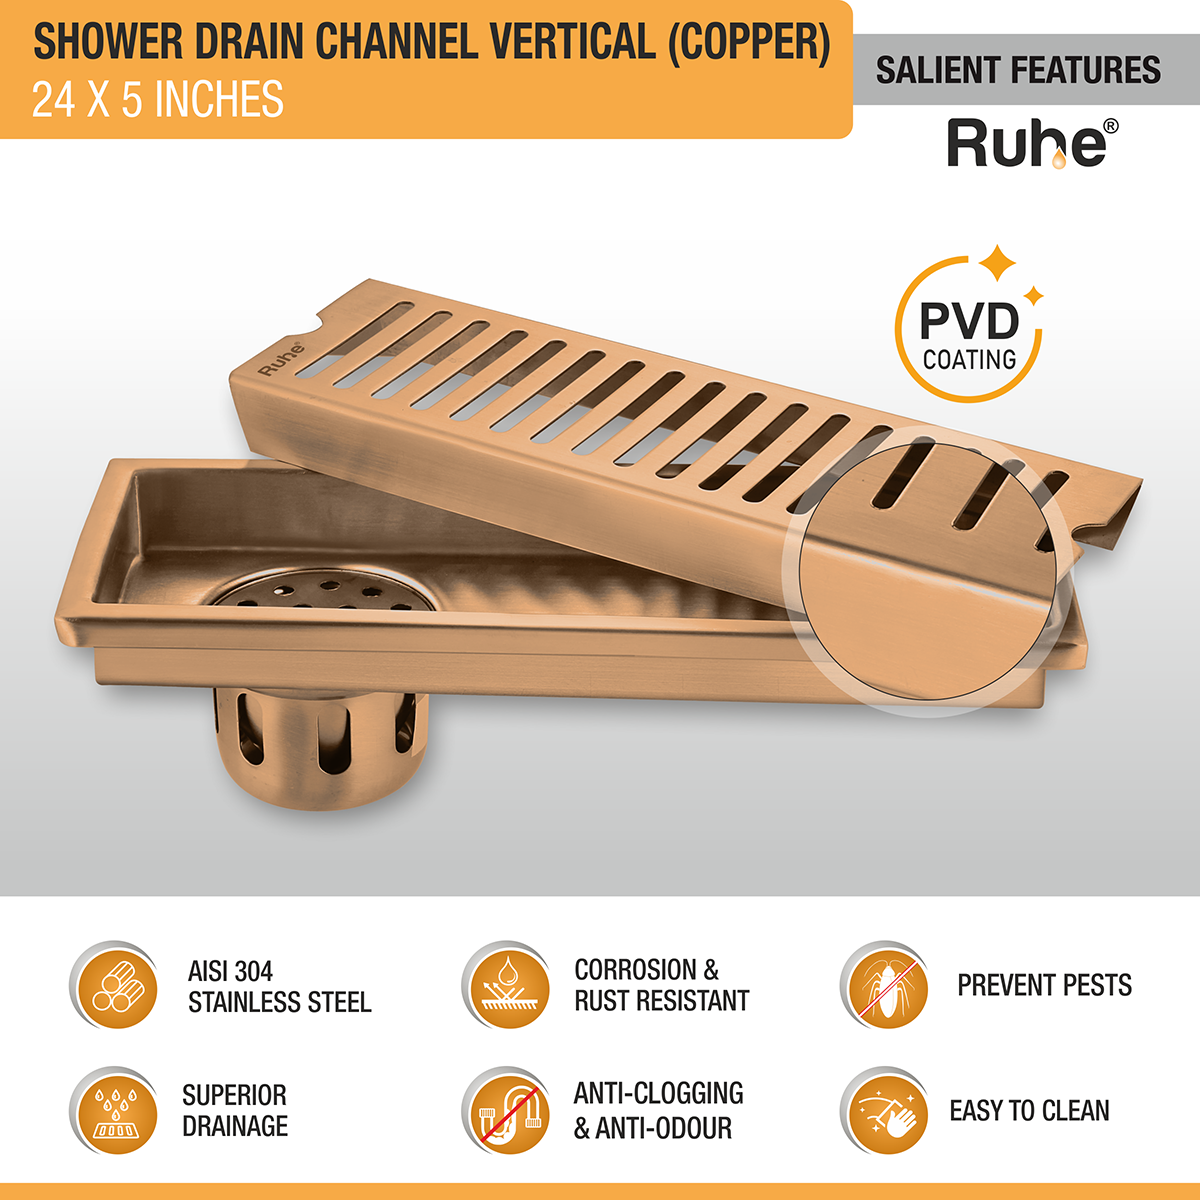 Vertical Shower Drain Channel (24 x 5 Inches) ROSE GOLD/ANTIQUE COPPER features